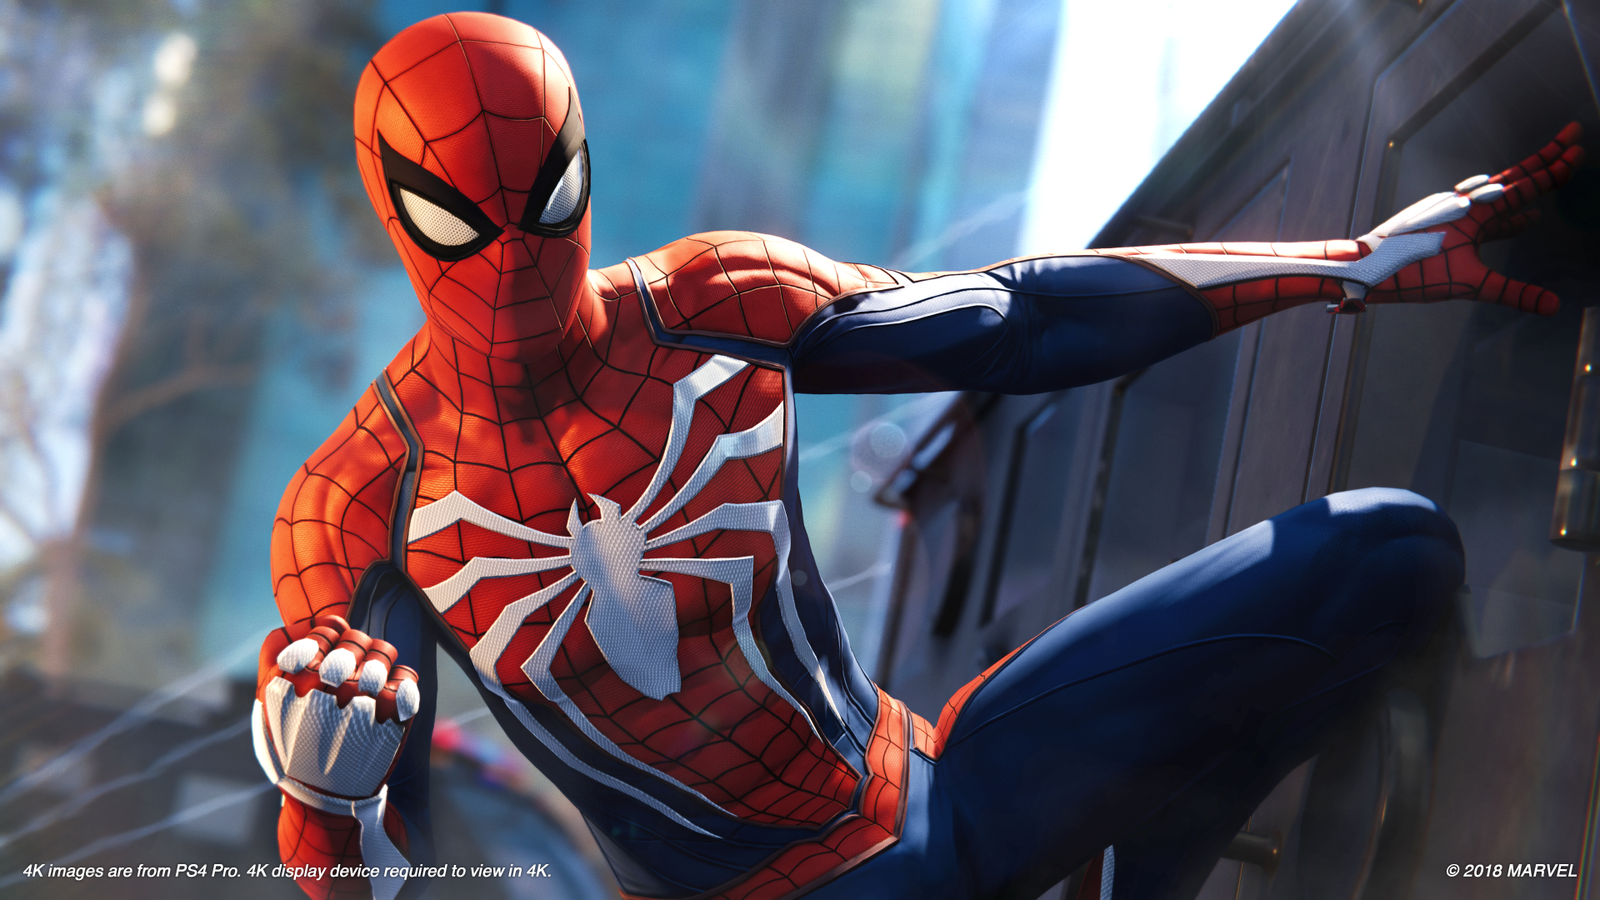 Marvel's Spider-Man 2 preview: hands-on with the web-slinging duo